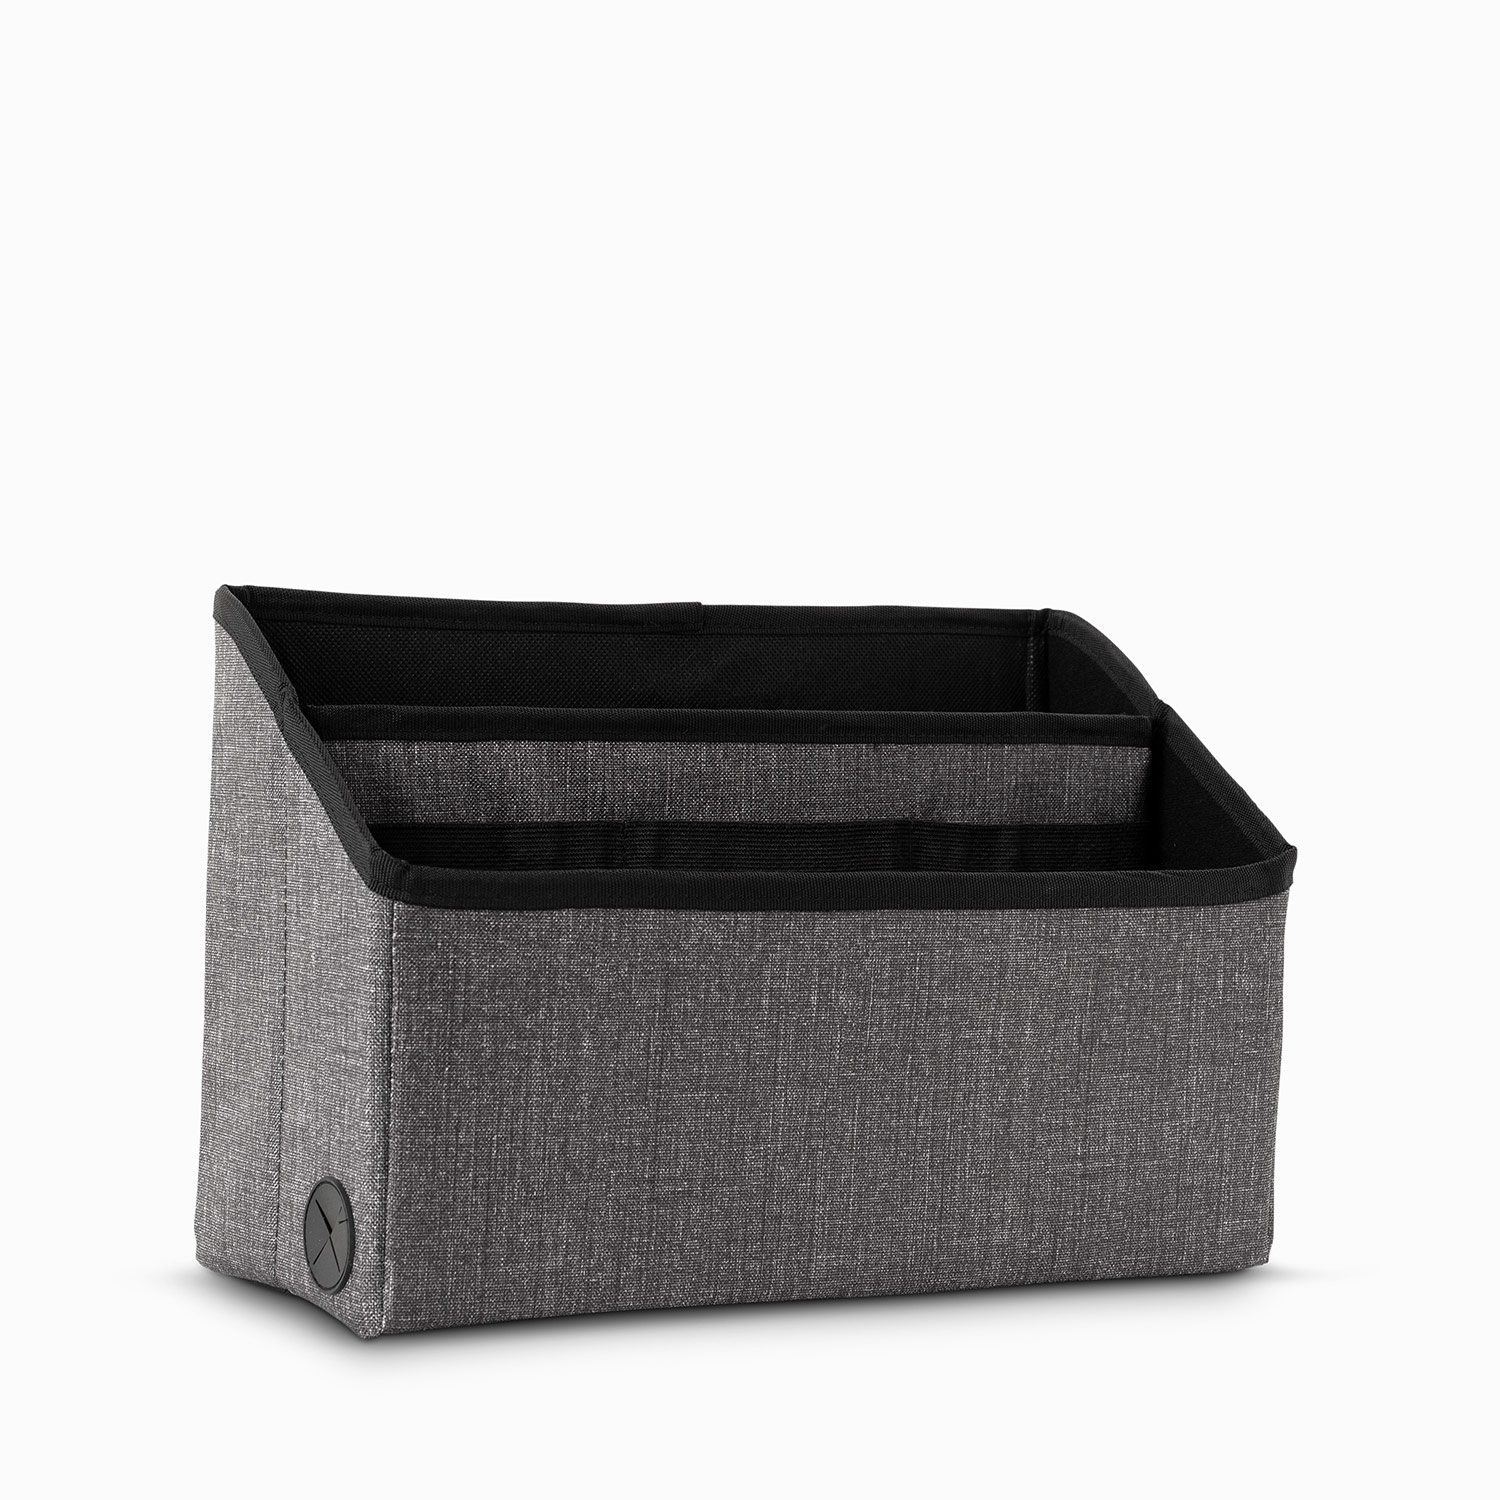 Charcoal Crosshatch - Office Desk Organizer - Thirty-One Gifts 